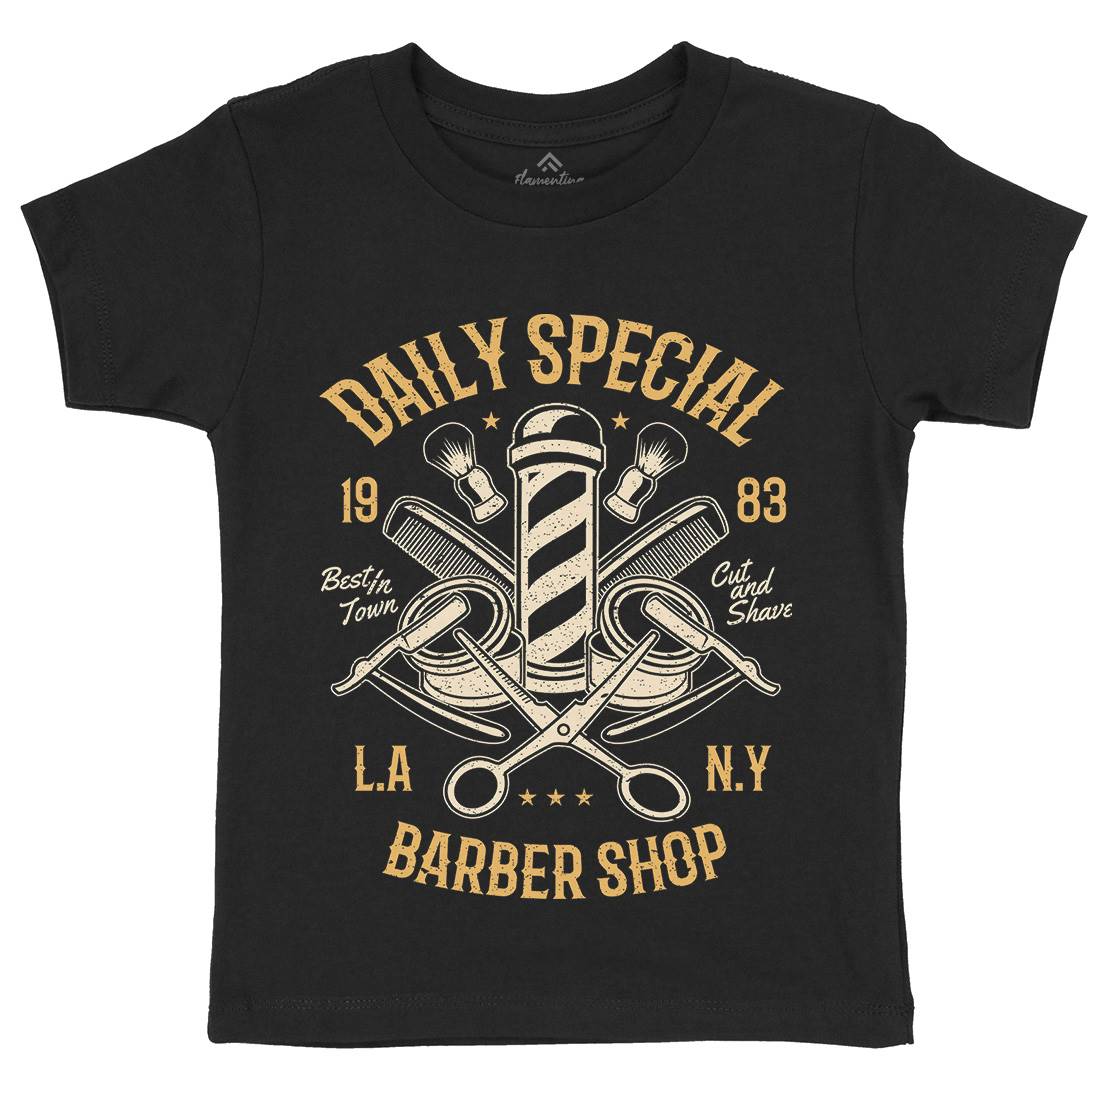 Daily Special Shop Kids Crew Neck T-Shirt Barber A041